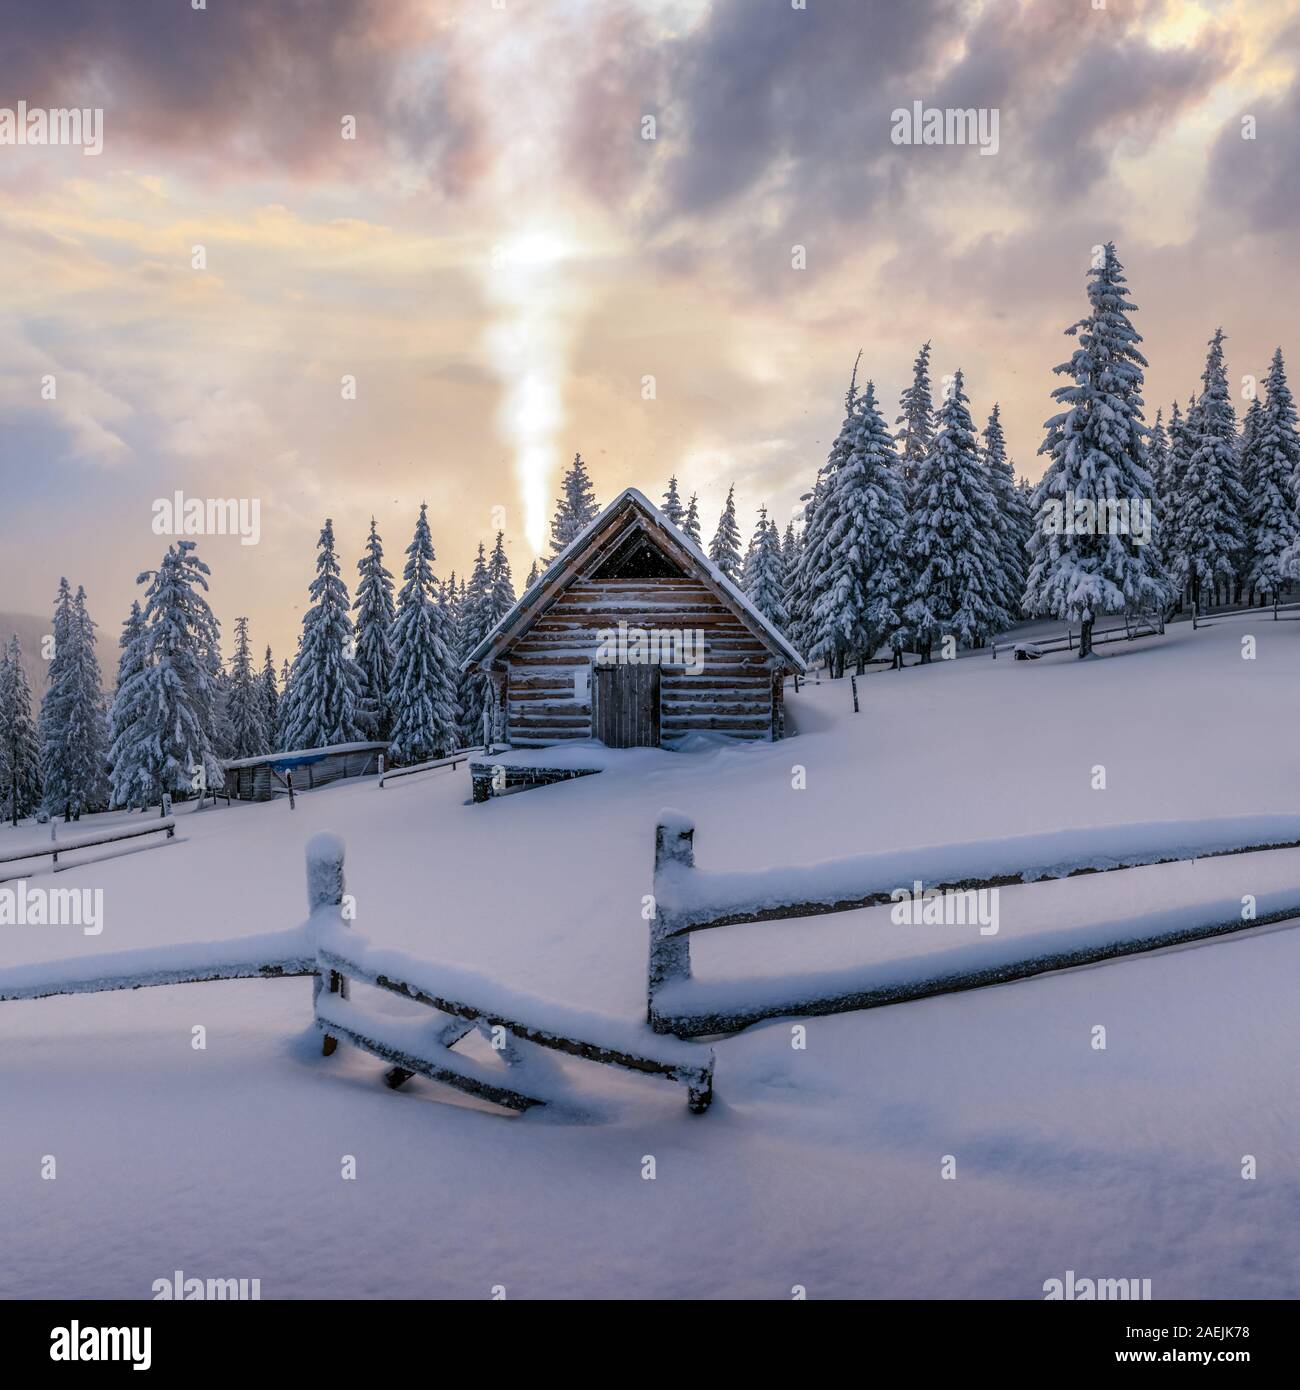 Fantastic winter landscape with wooden house in snowy mountains. Smoke comes from the chimney of snow covered hut. Christmas holiday concept Stock Photo